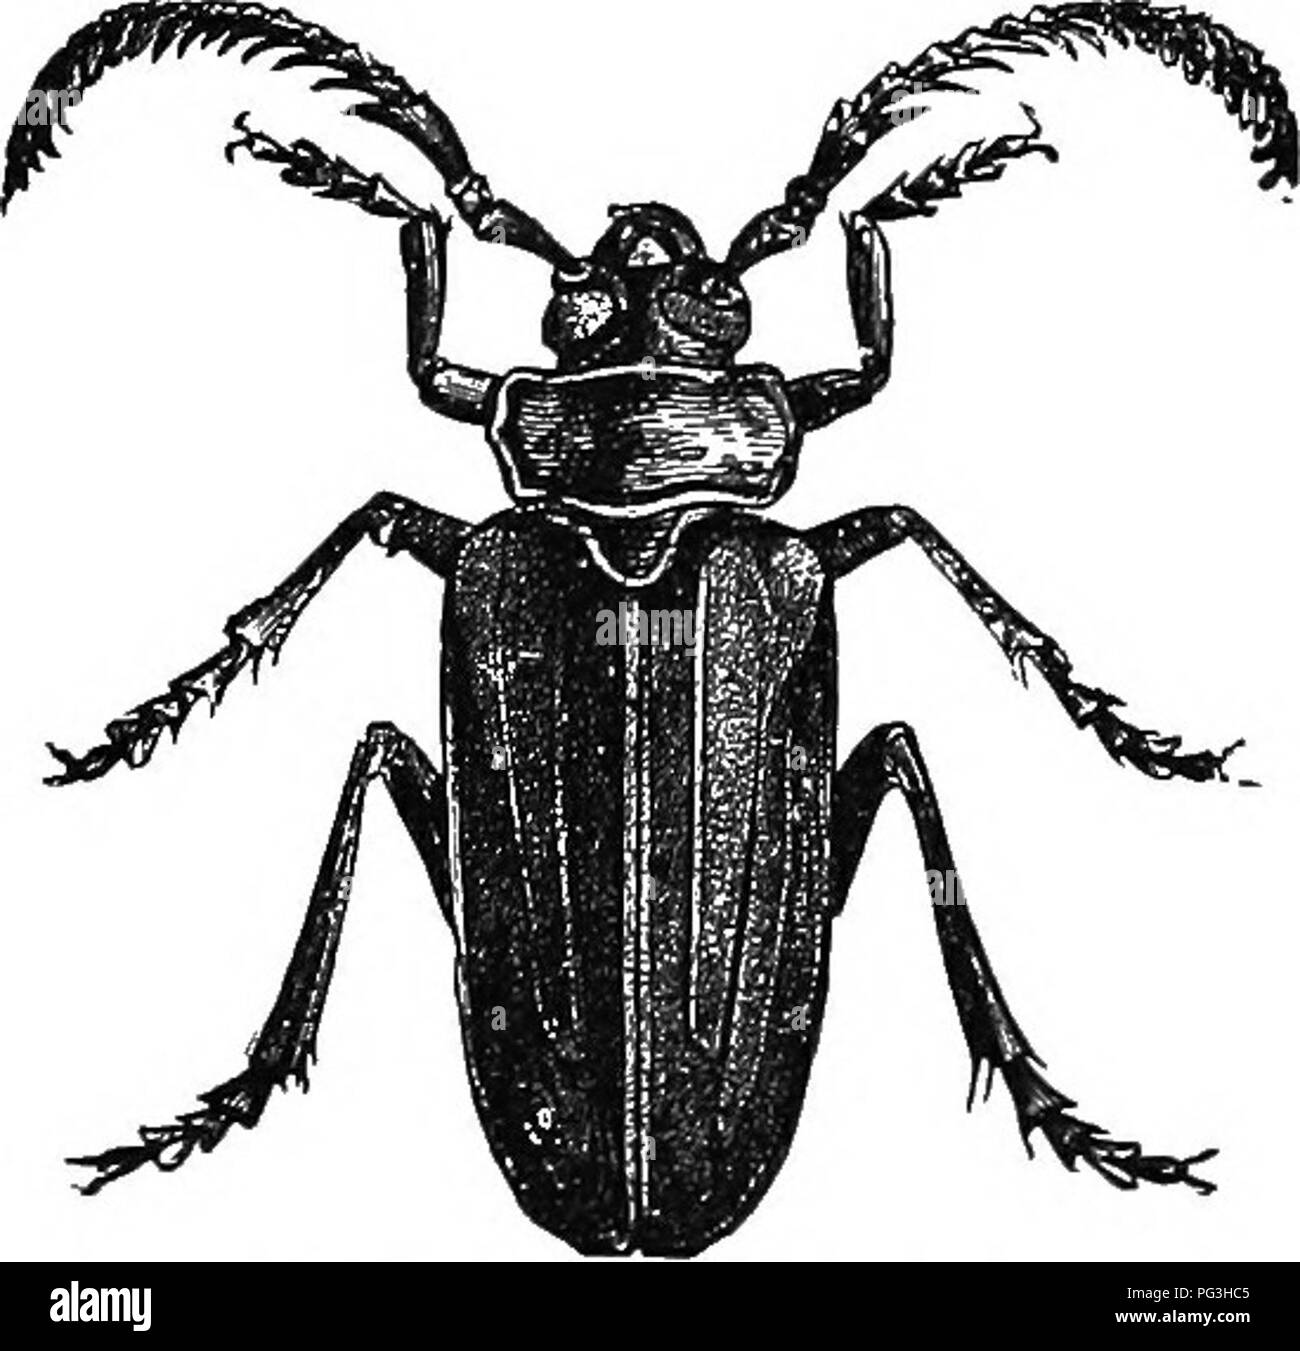 . An illustrated descriptive catalogue of the coleoptera or beetles (exclusive of the Rhynchophora) known to occur in Indiana : with bibliography and descriptions of new species . Beetles. 1012 FAMILY LII. CEEAMBYCIDiE. larly punctured. All the joints of liind tursi densely pubescent beneath, with a smooth median channel. Length 22-47 mm. (Fig. 424.) Southern half of  State; scarce. June 20--August 7. The fe- males are always much larger than the males. The beetle is known as the &quot;Broad-necked Prionus&quot; and the larvpj are said to injure the grape, apple, poplar and pine l)y boring in1 Stock Photo